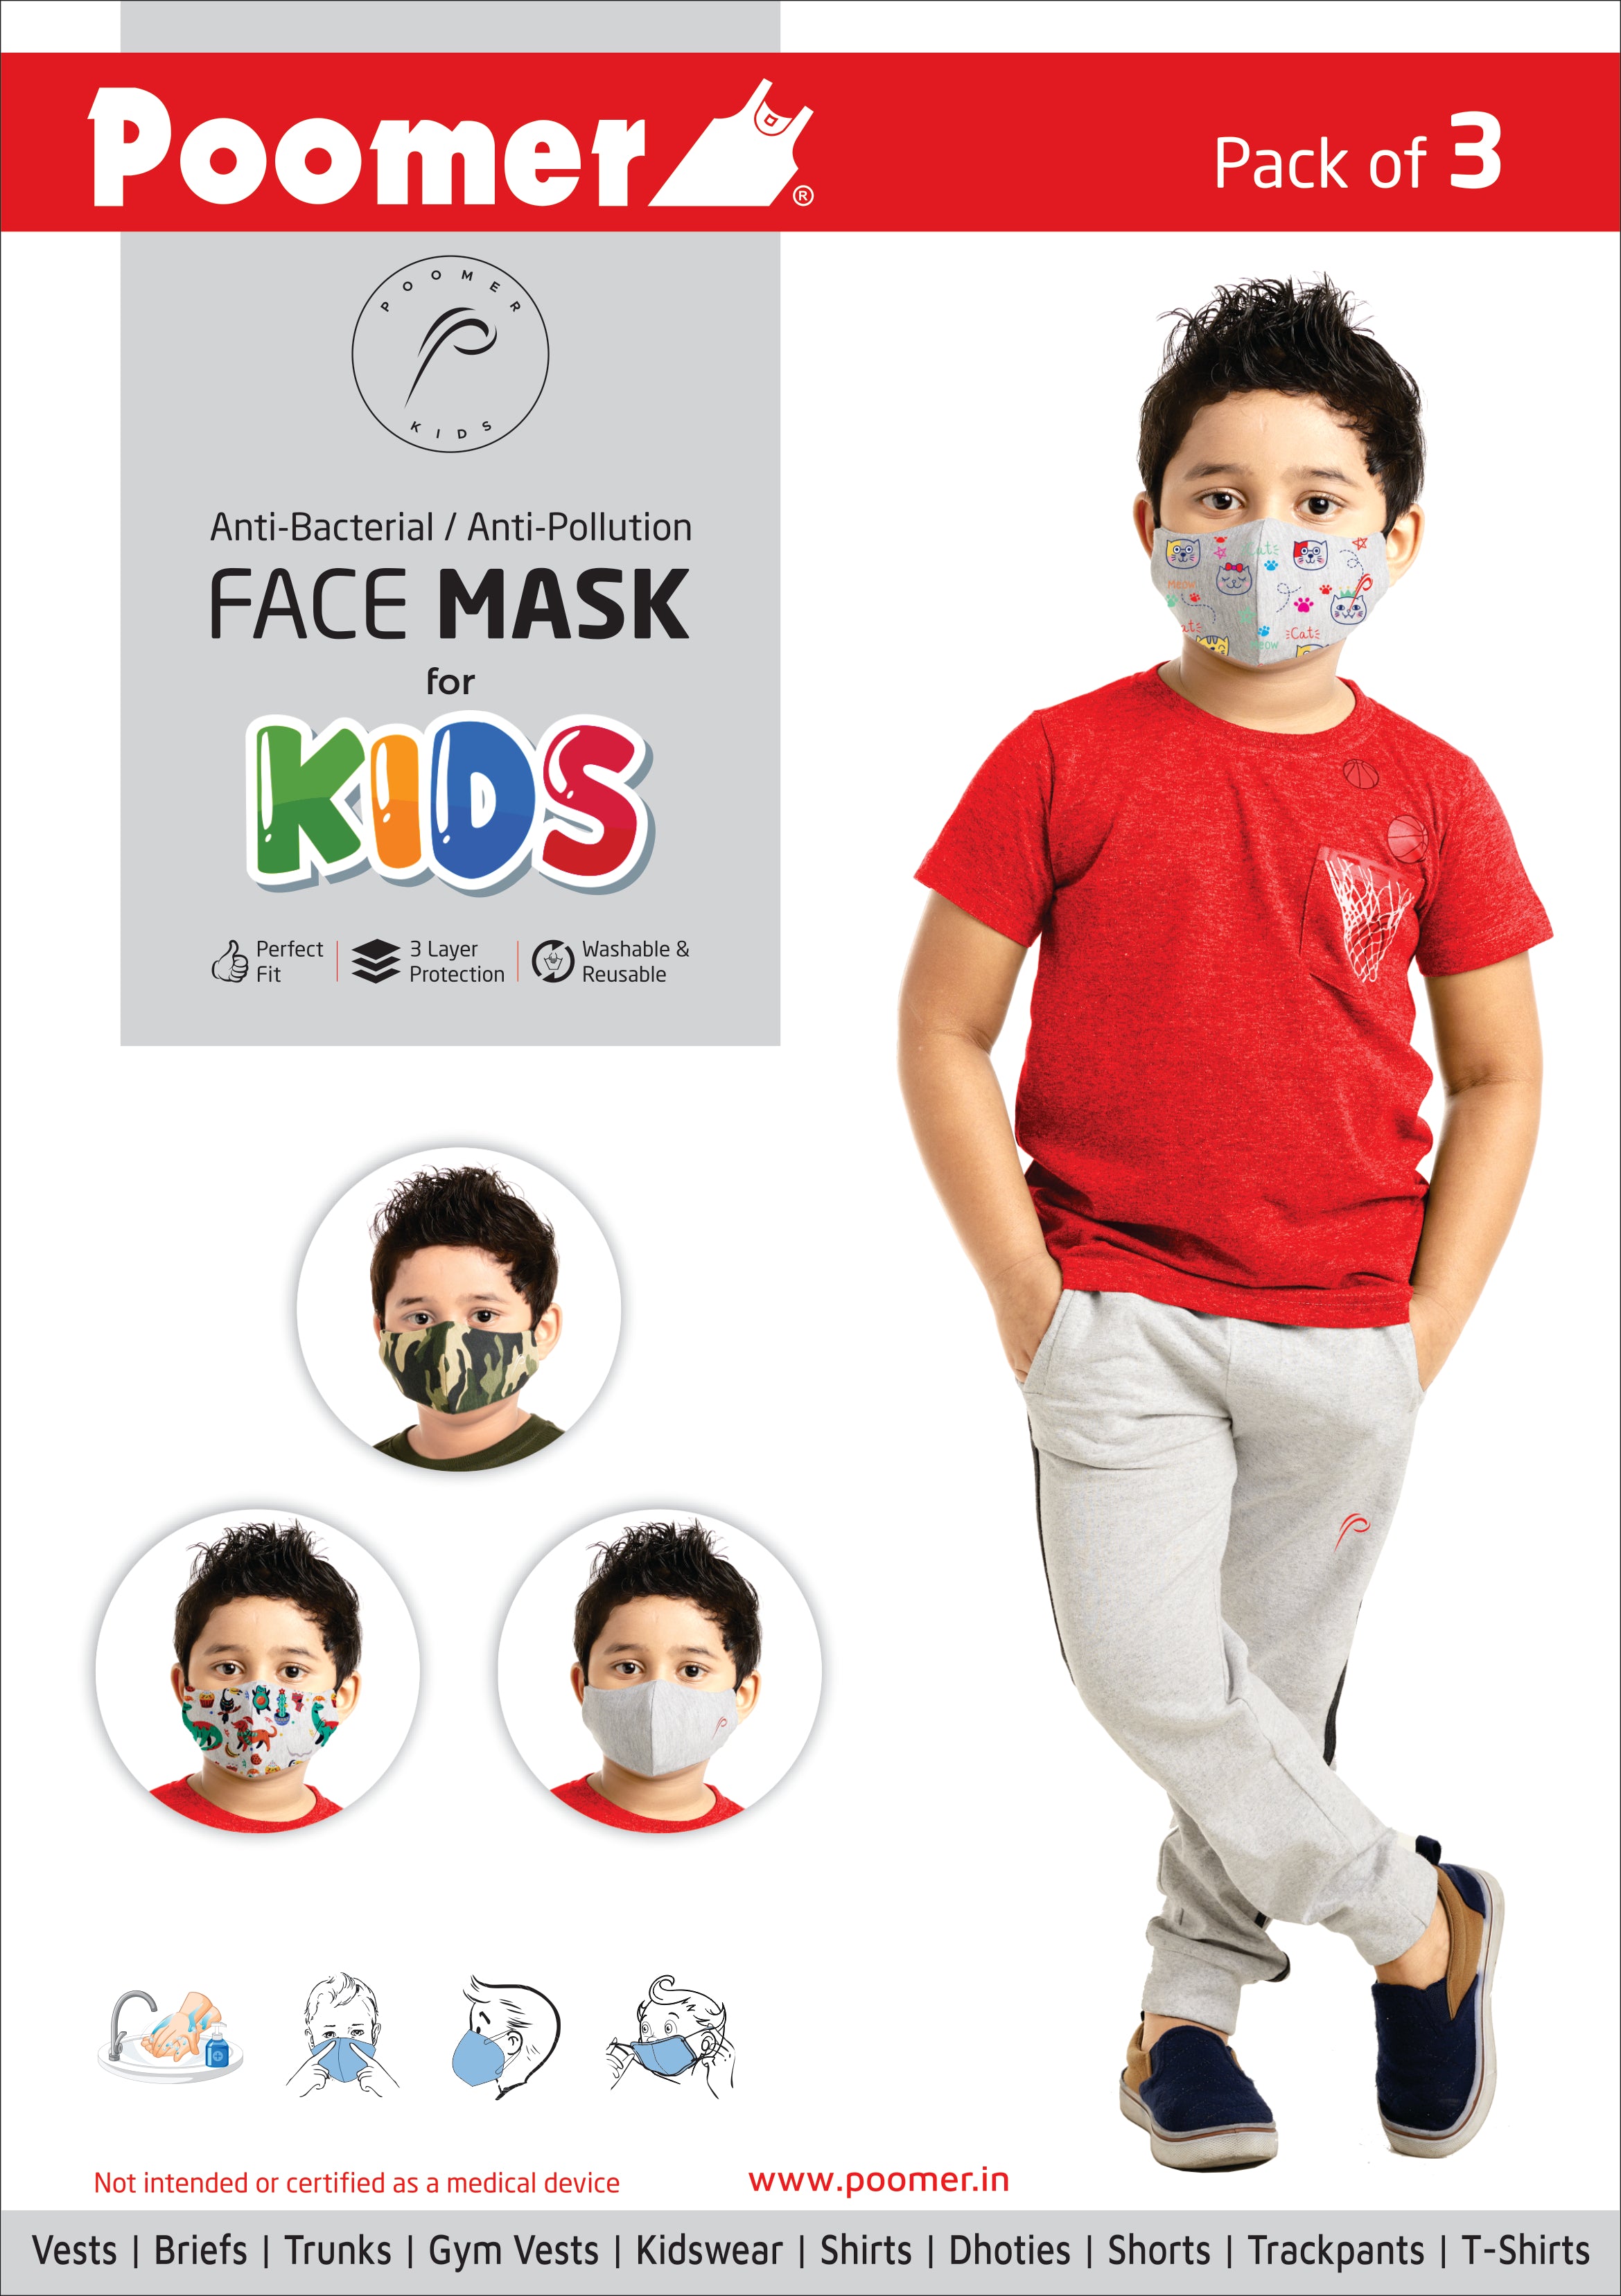 Poomer Kids Face Mask - 3 layer Anti-Bacterial & Anti-Pollution Face Mask (Pack of 3)